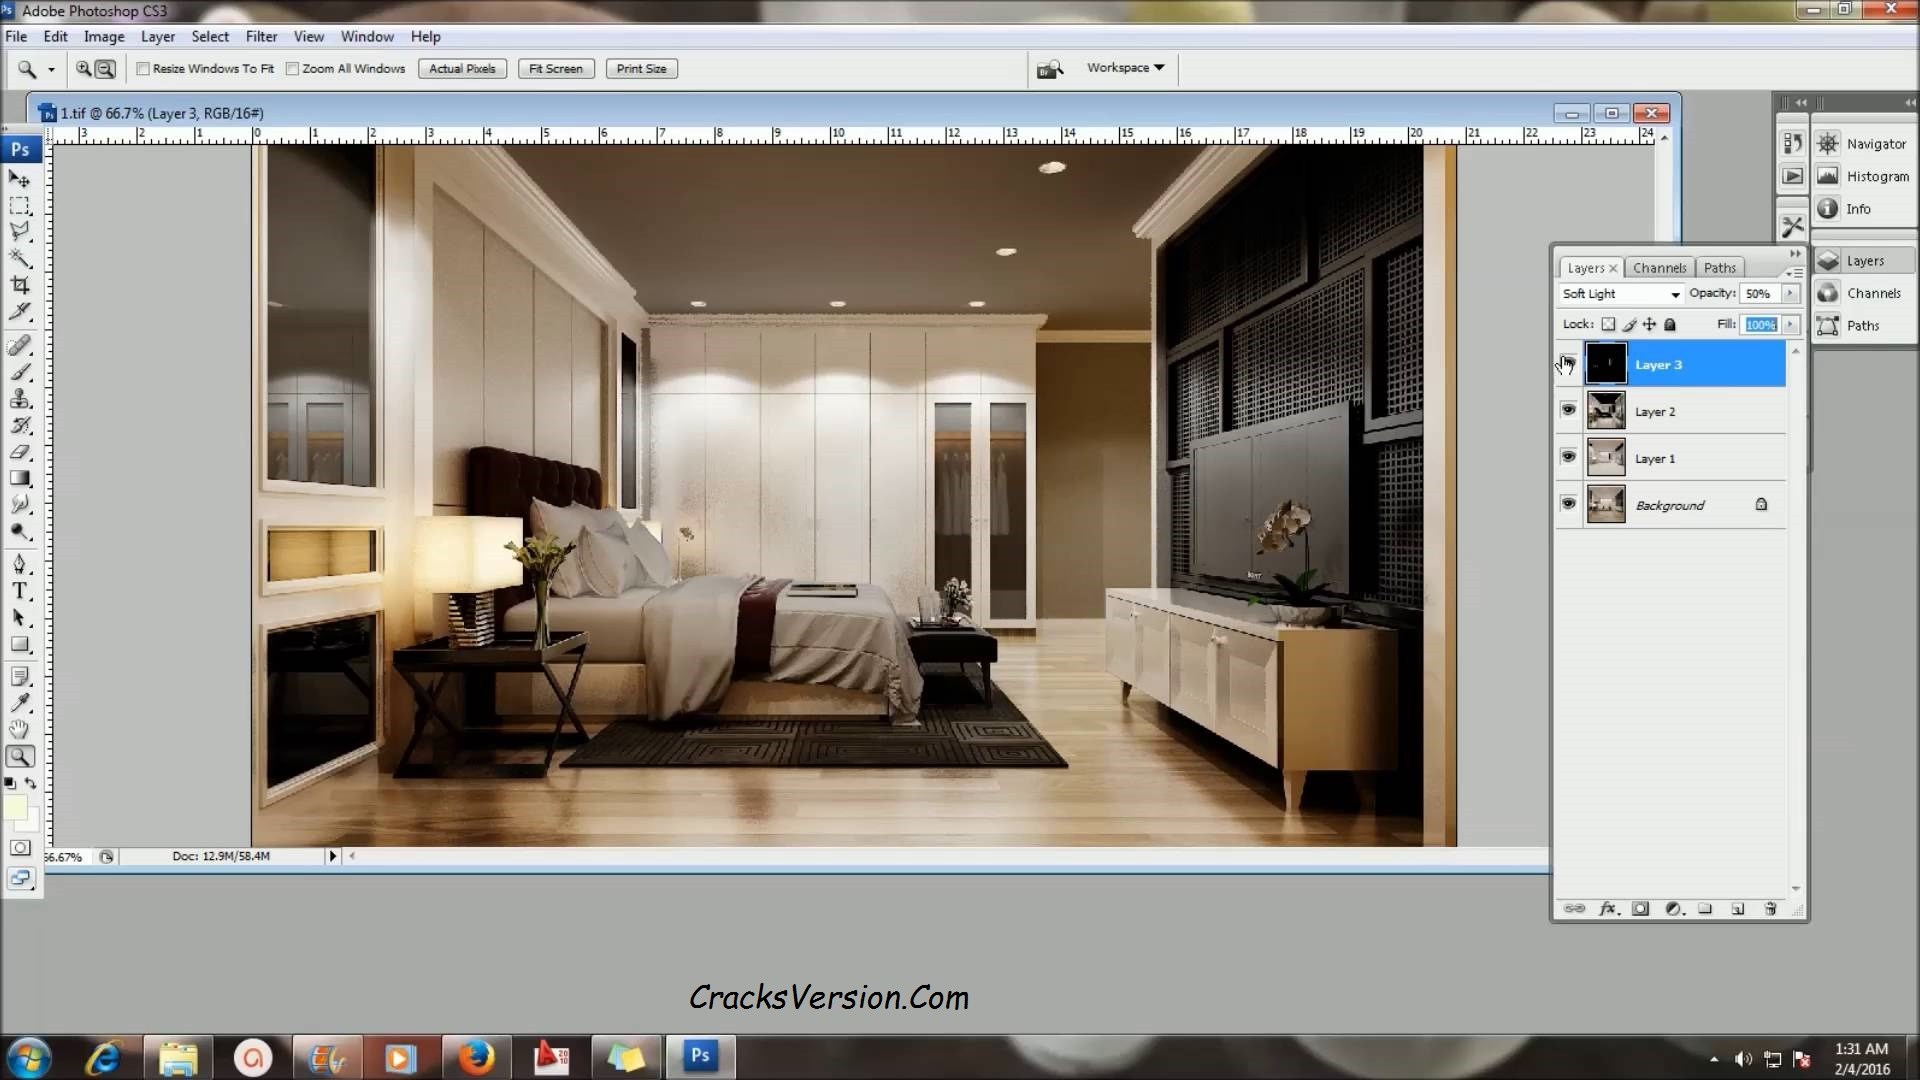 vray for sketchup 2014 free download full version